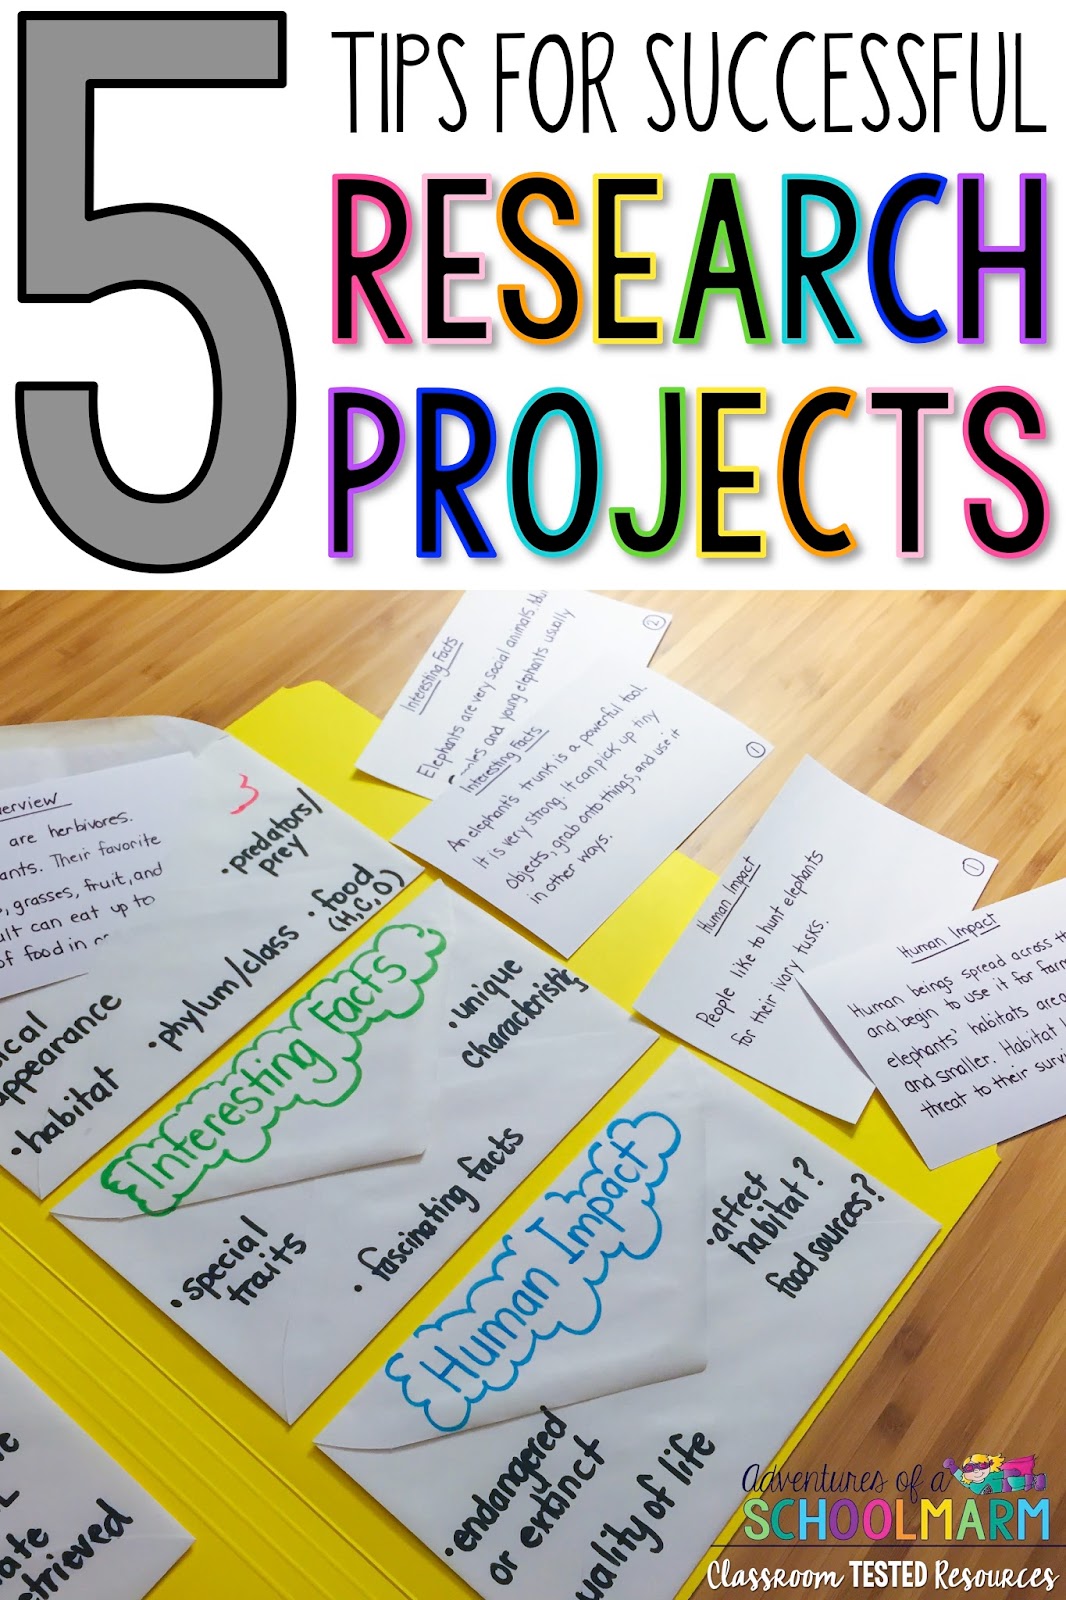 What's New About research projects